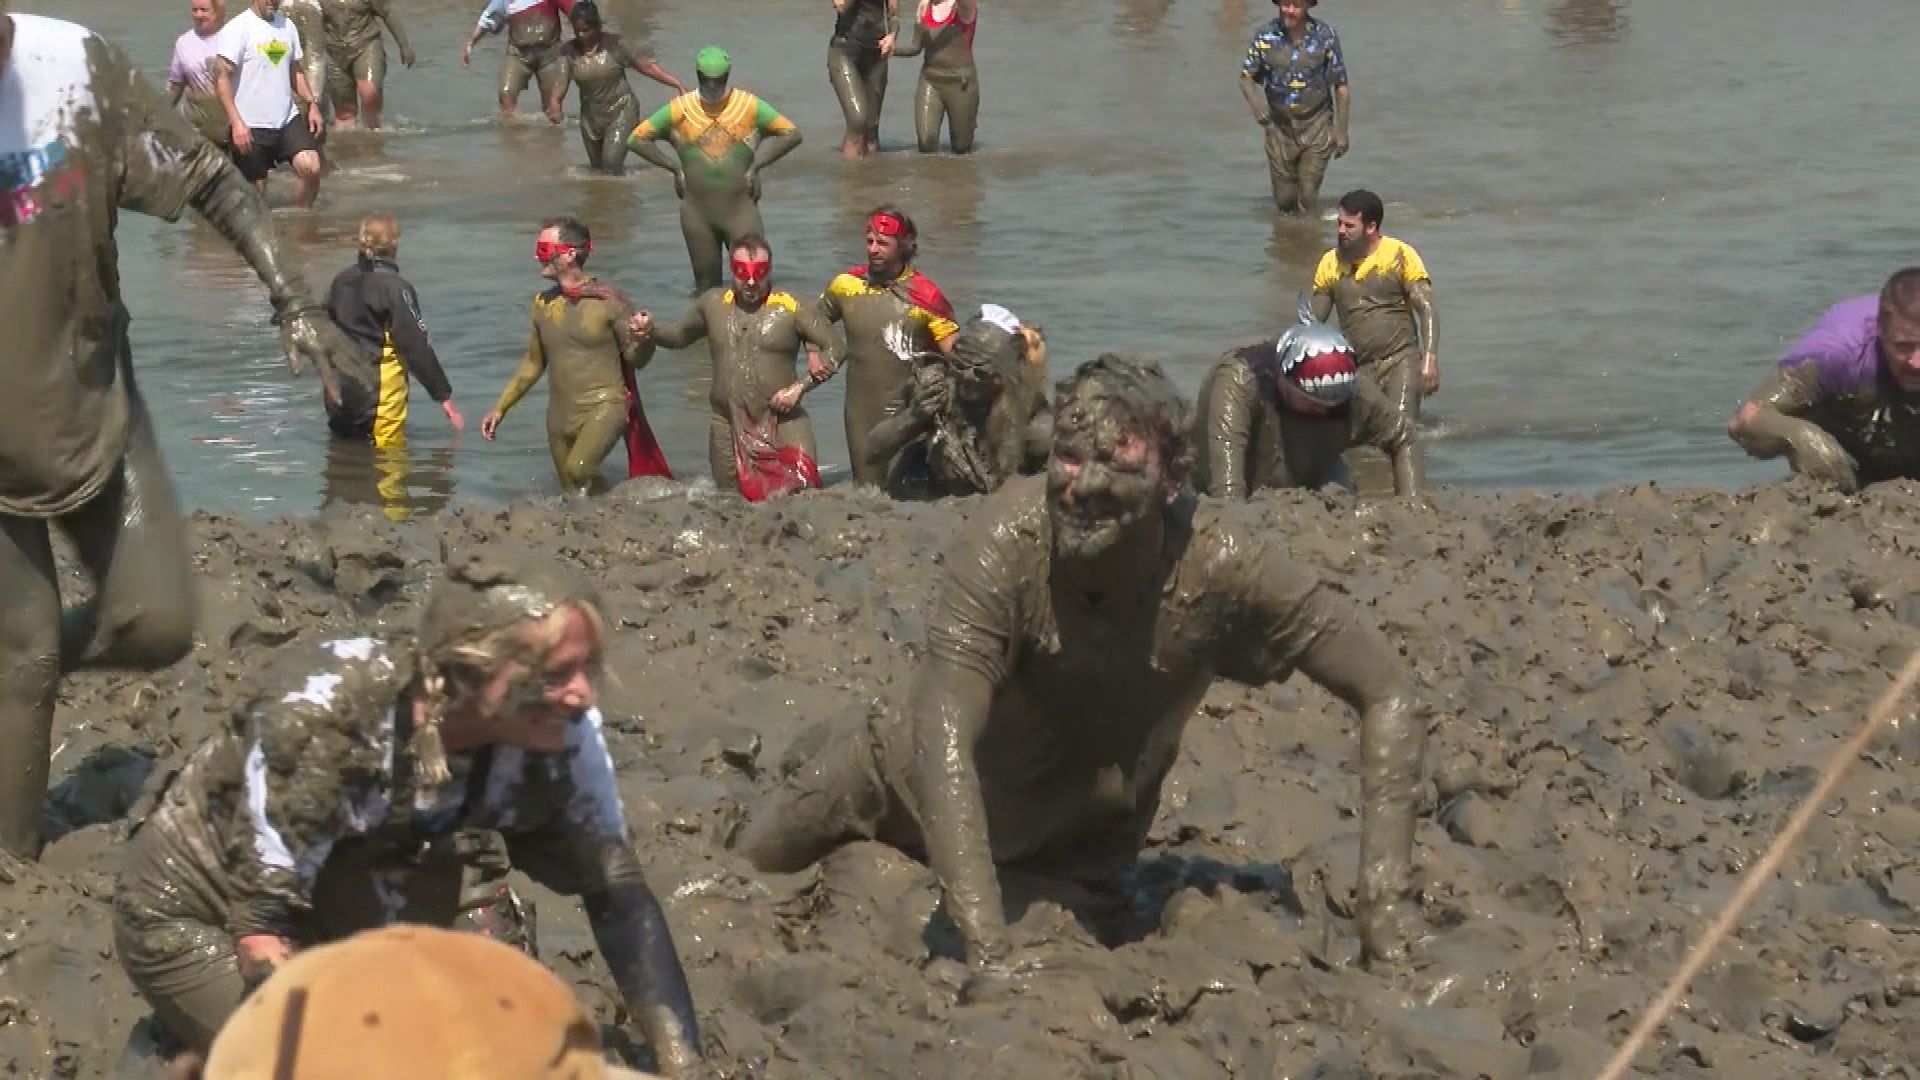 Maldon Mud Race runners get mucky all in the name of charity